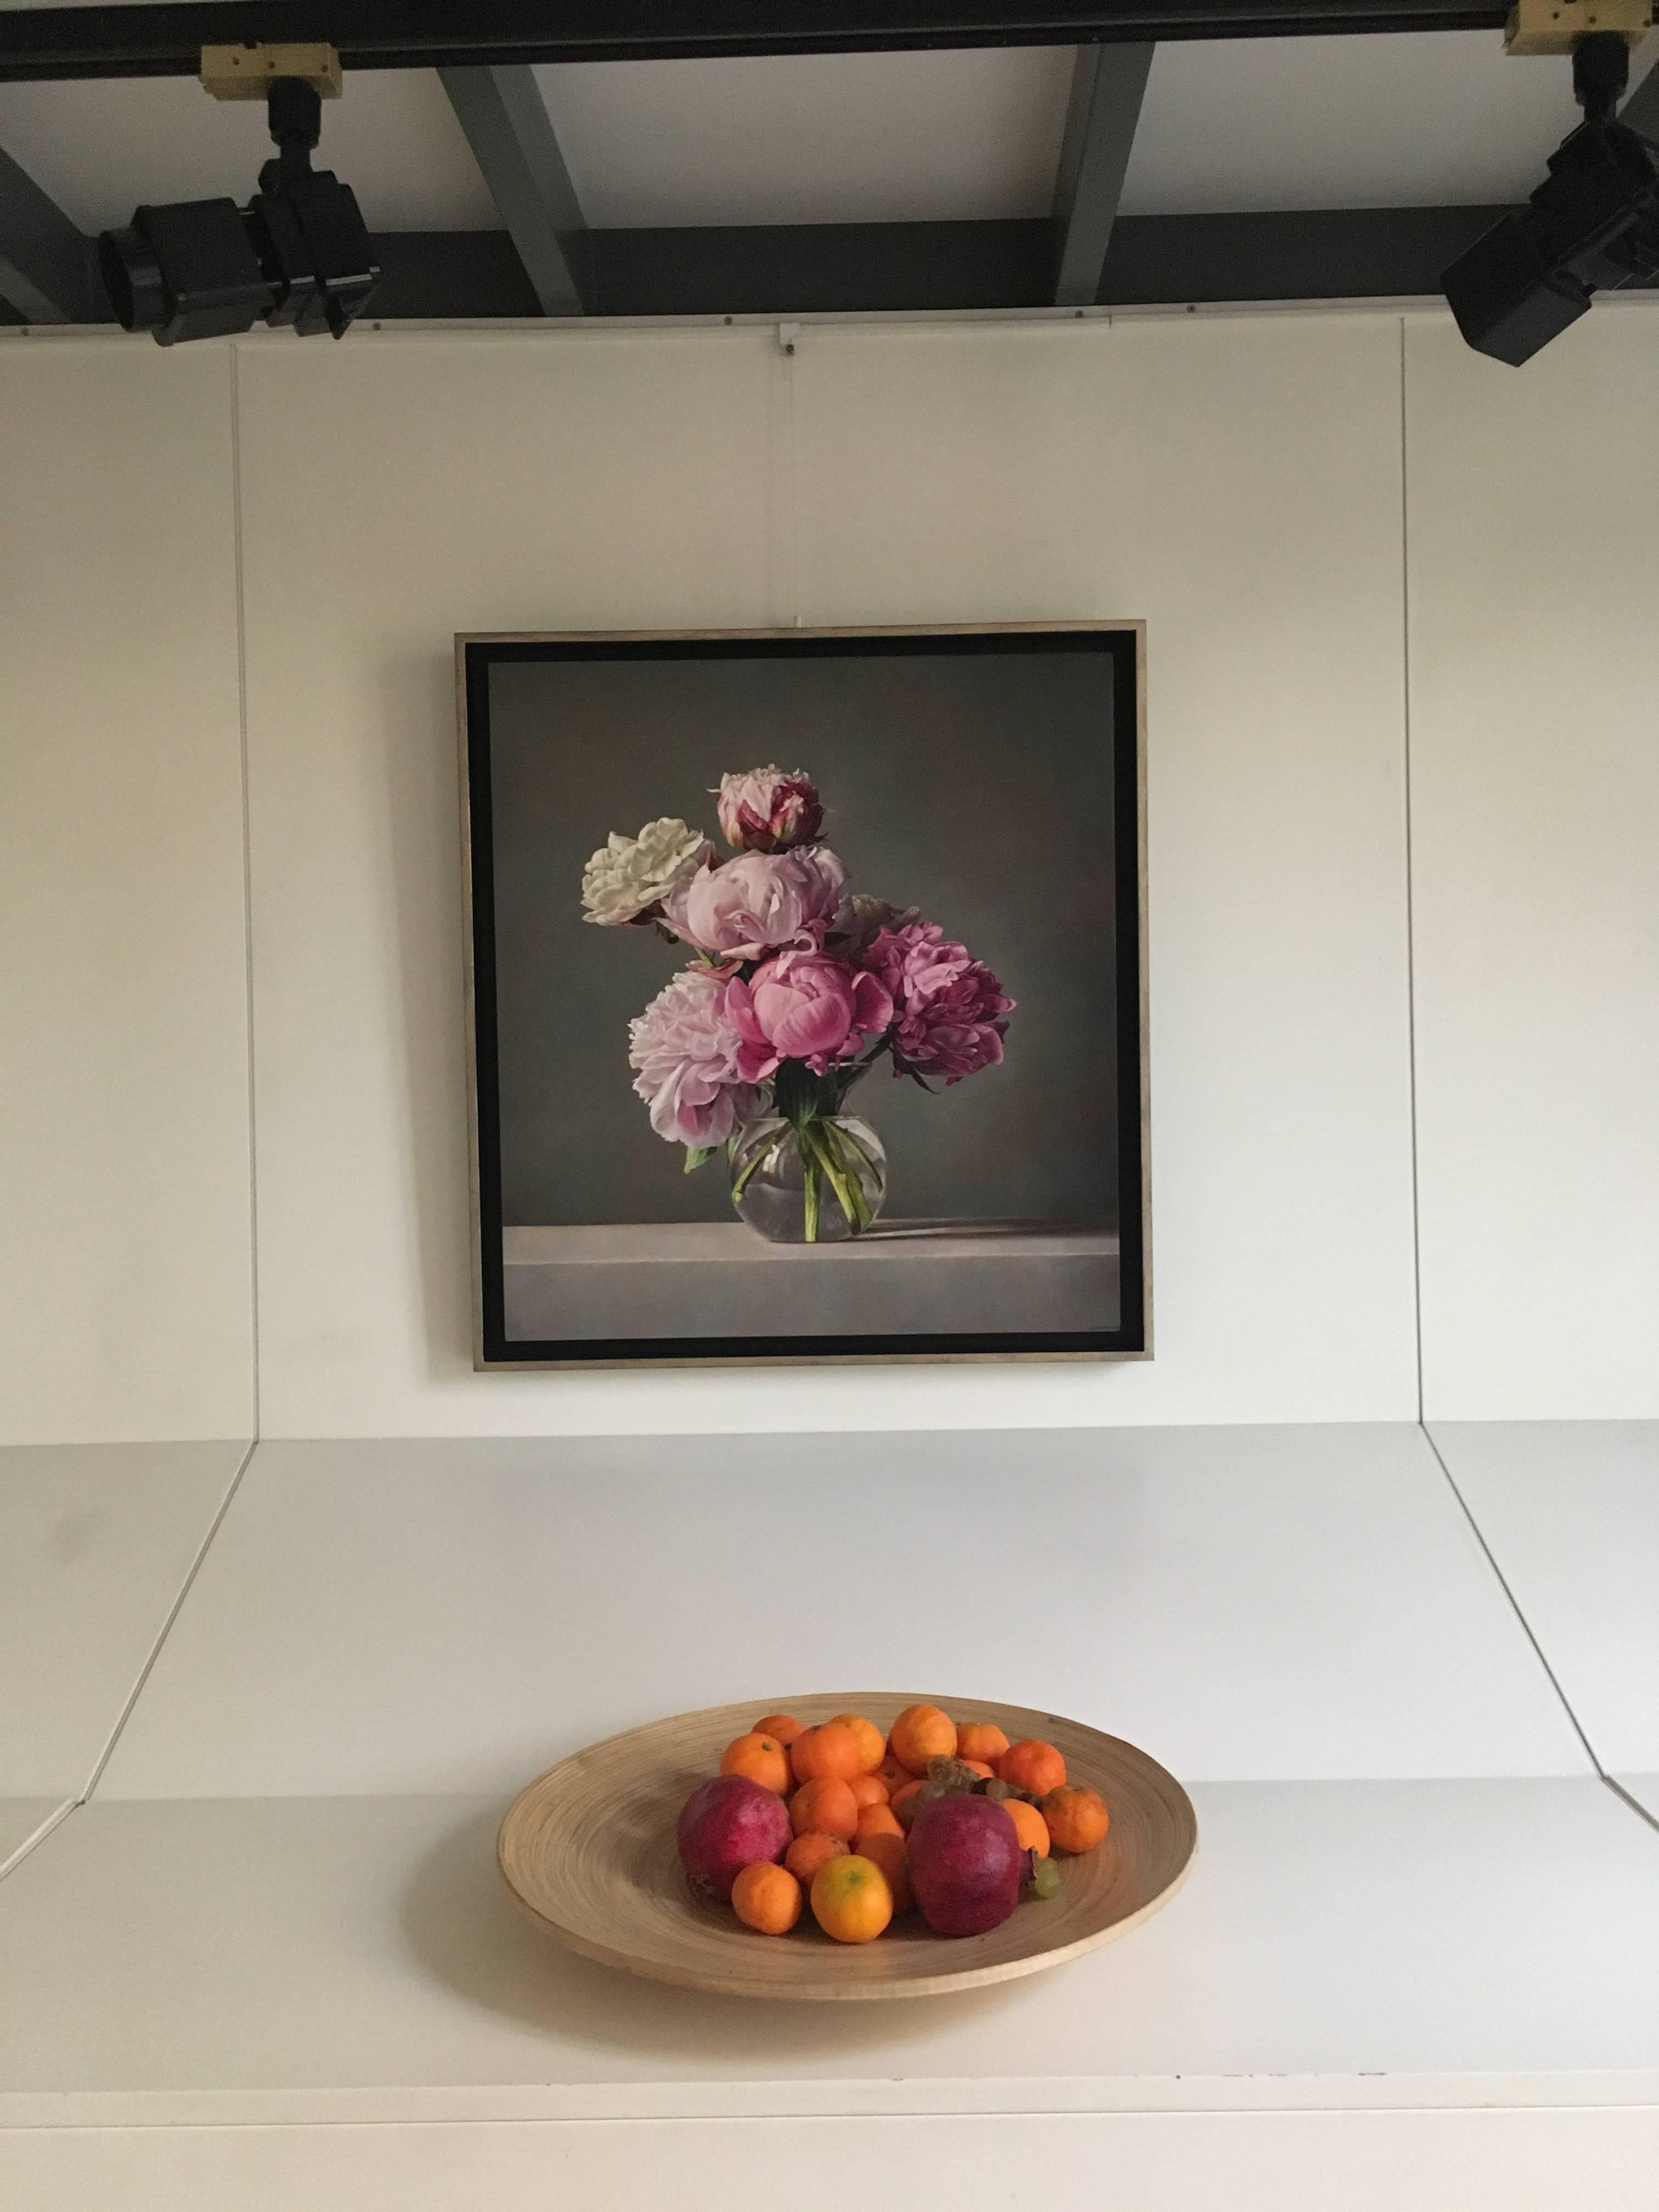 Corona’s artworks are inspired by the great masters of the 16th and 17th centuries, however, the artist is able to offer a contemporary rereading of both still life and portrait genres. The artist is therefore able to combine traditional materials